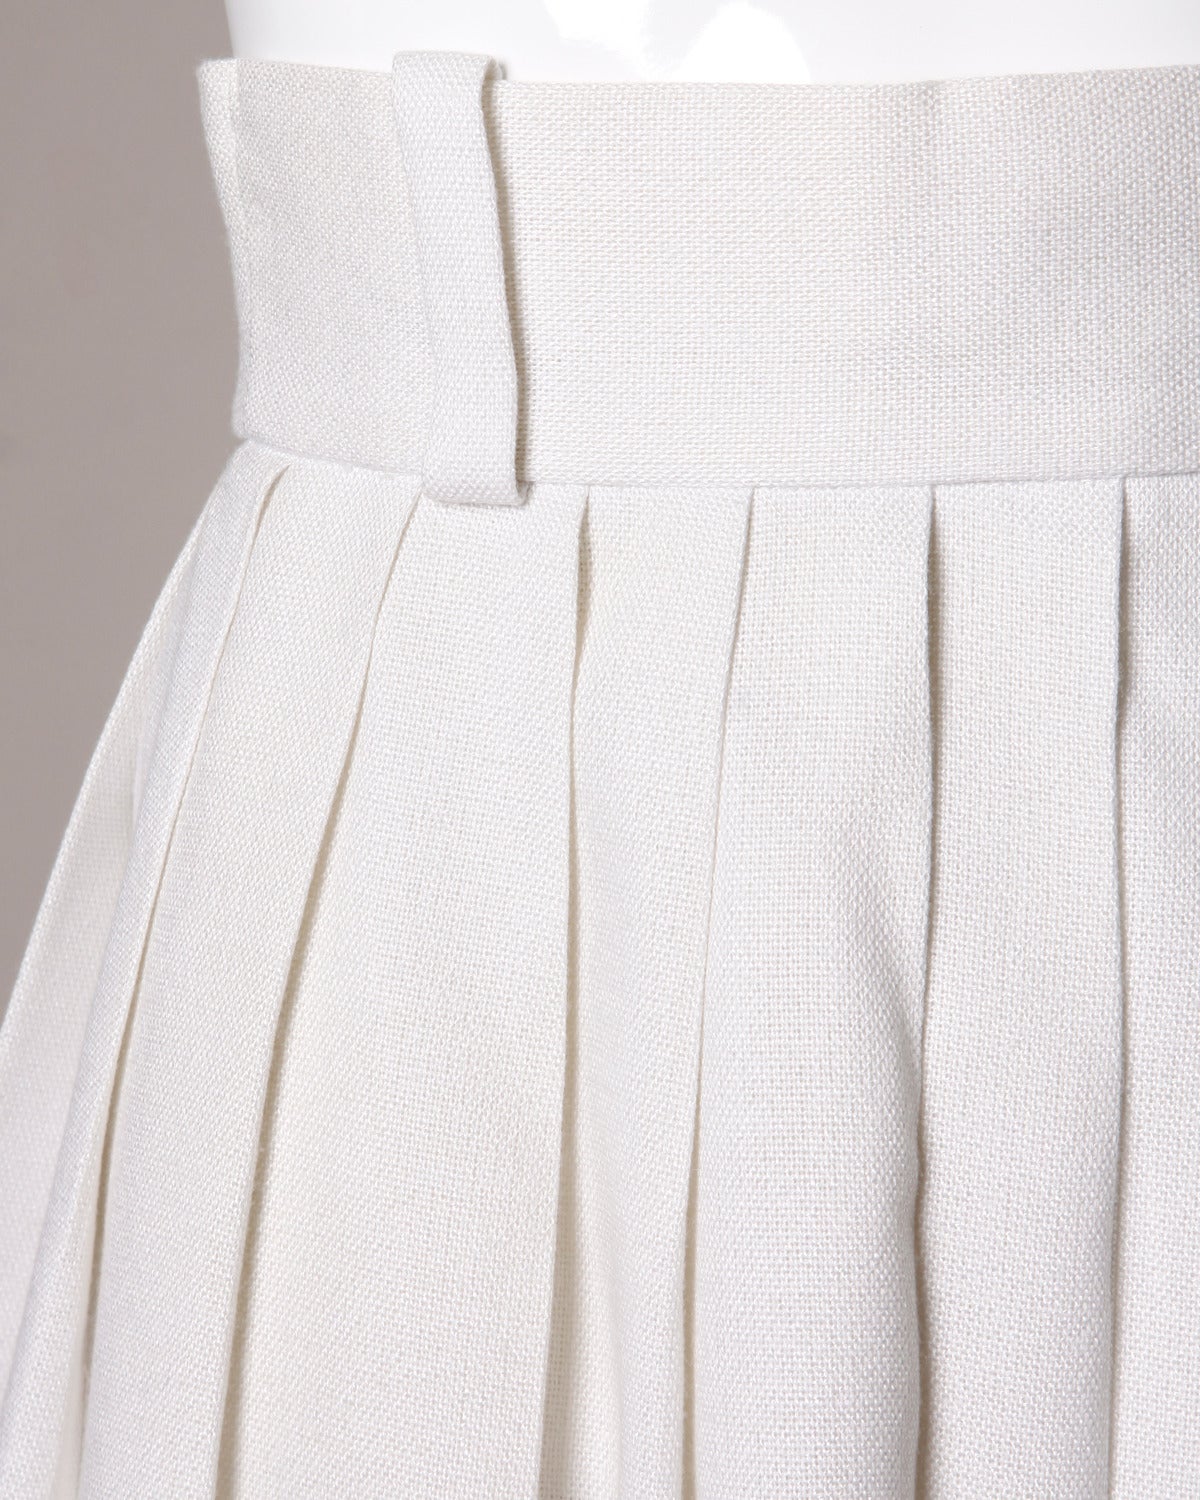 Sleek white linen pleated skirt with black ribbon trim by Anne Fogarty.

Details:

Unlined
Back Zipper and Hook Closure
Marked Size: 6
Estimated Size: XS
Color: Ivory/ Black
Fabric: Feels like Linen
Label: Anne